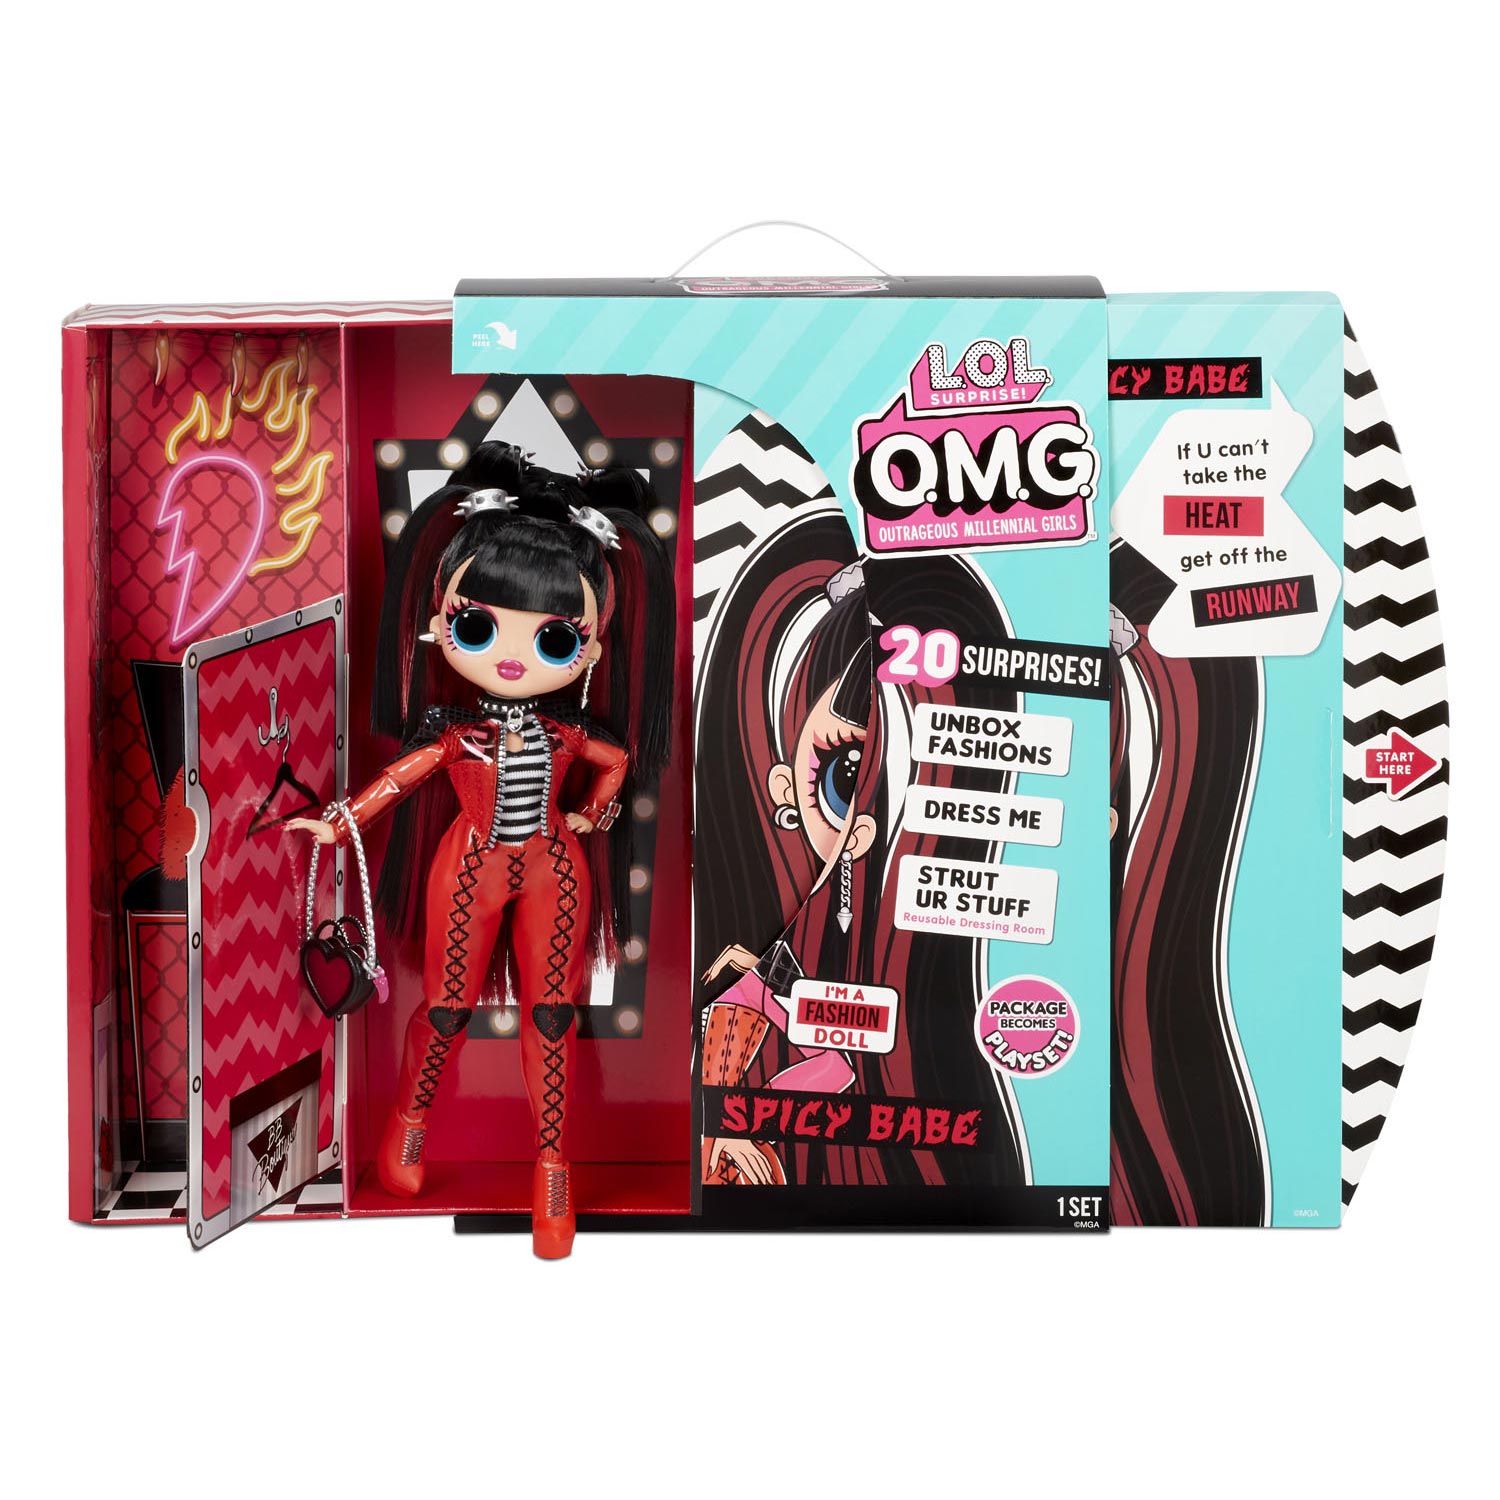 L.O.L. Surprise OMG Pop Series 4 - Spicy Babe